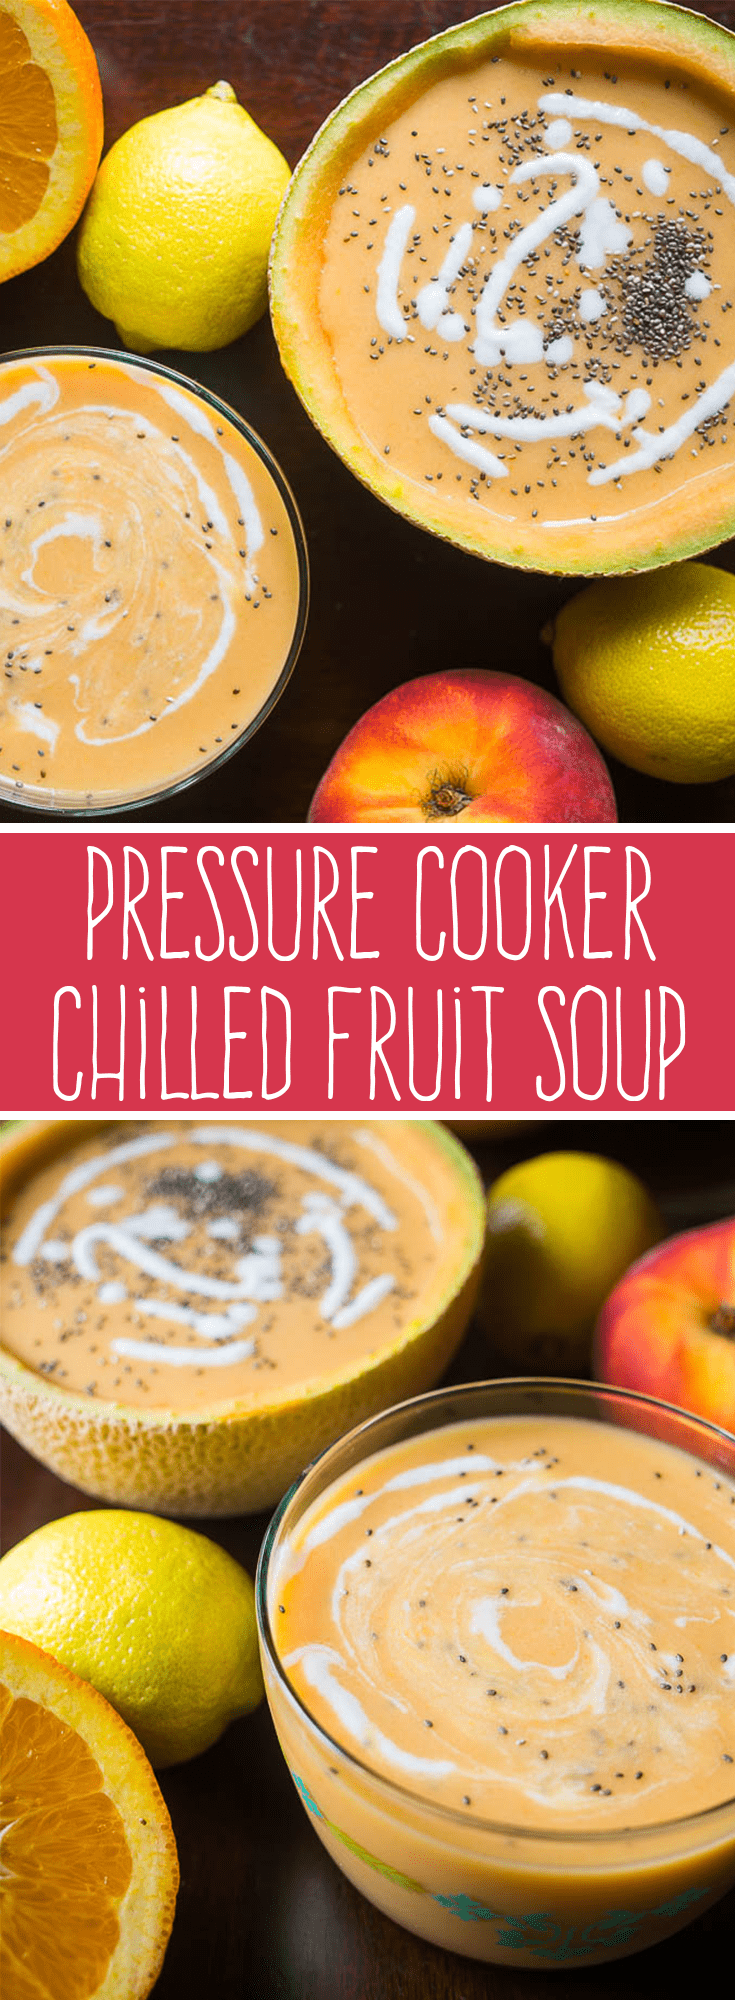 Chilled Fruit Soup is the perfect way to turn your favorite summer fruits into a creamy and delicious snack, dessert, or wholesome breakfast! This Pressure Cooker chilled fruit soup recipe makes a refreshing meal any time of the day! #soup #summerrecipes #instantpot #pressurecooker via @PressureCook2da